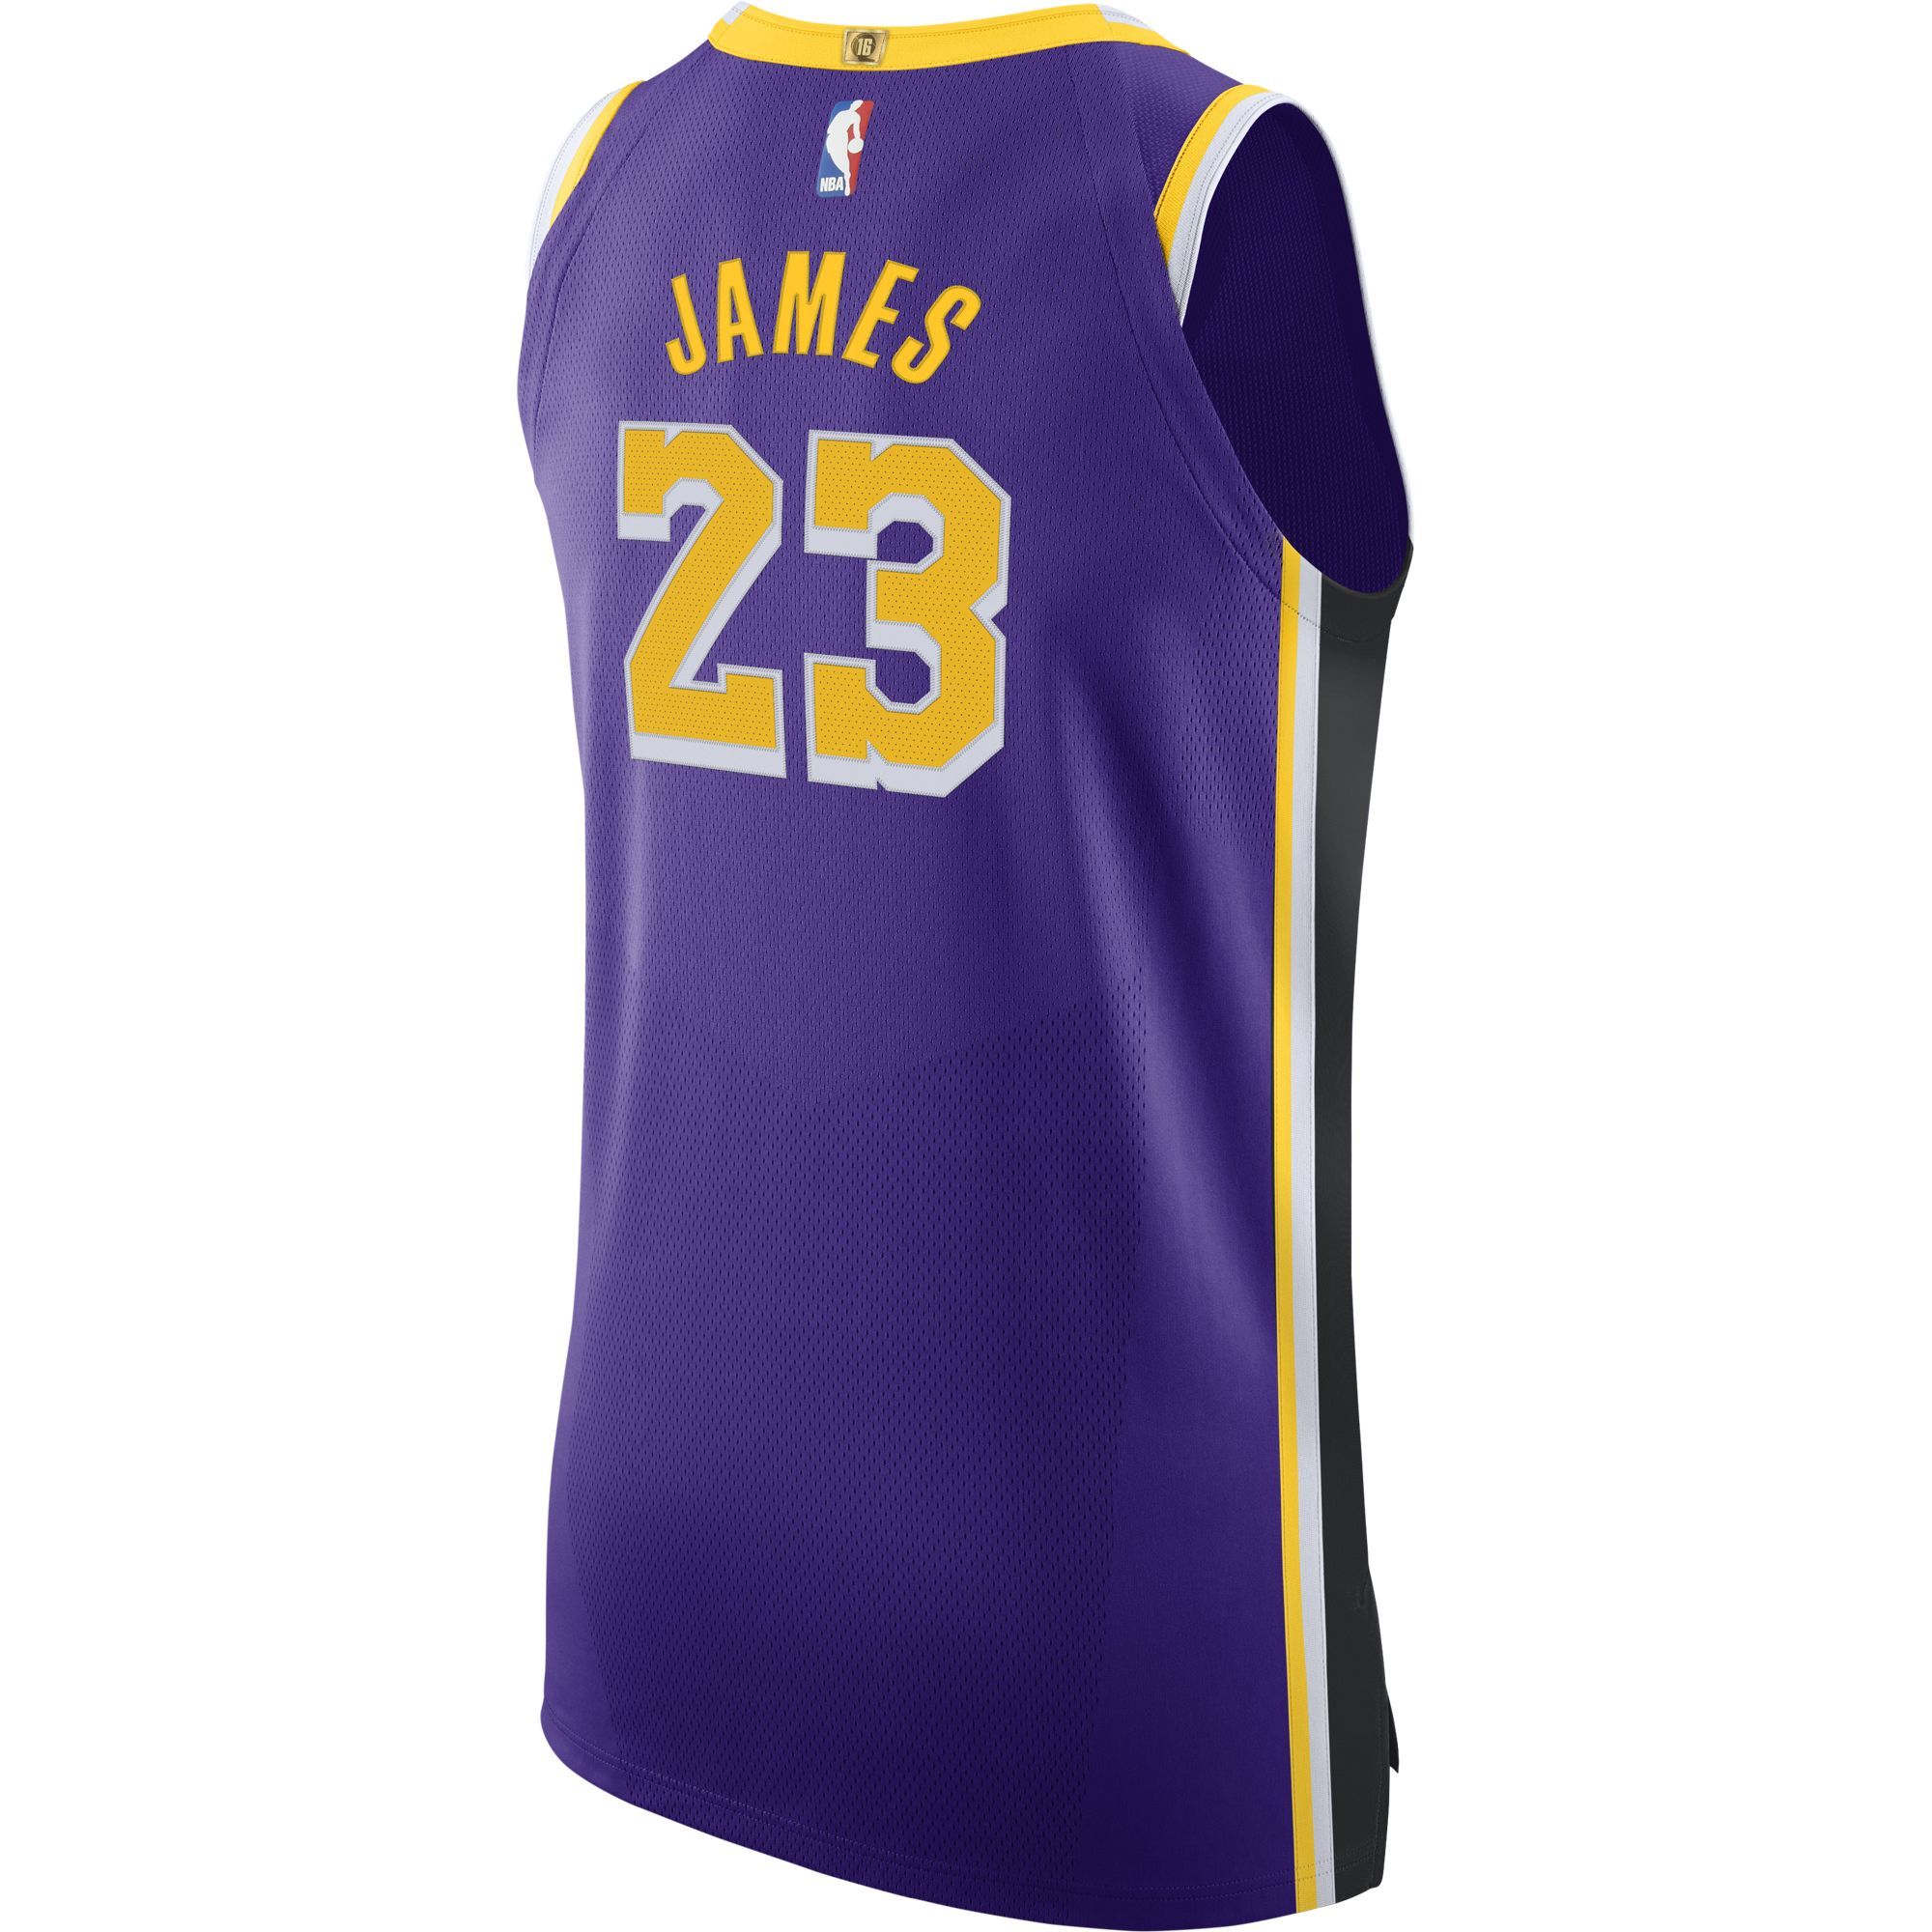 lakers jersey james